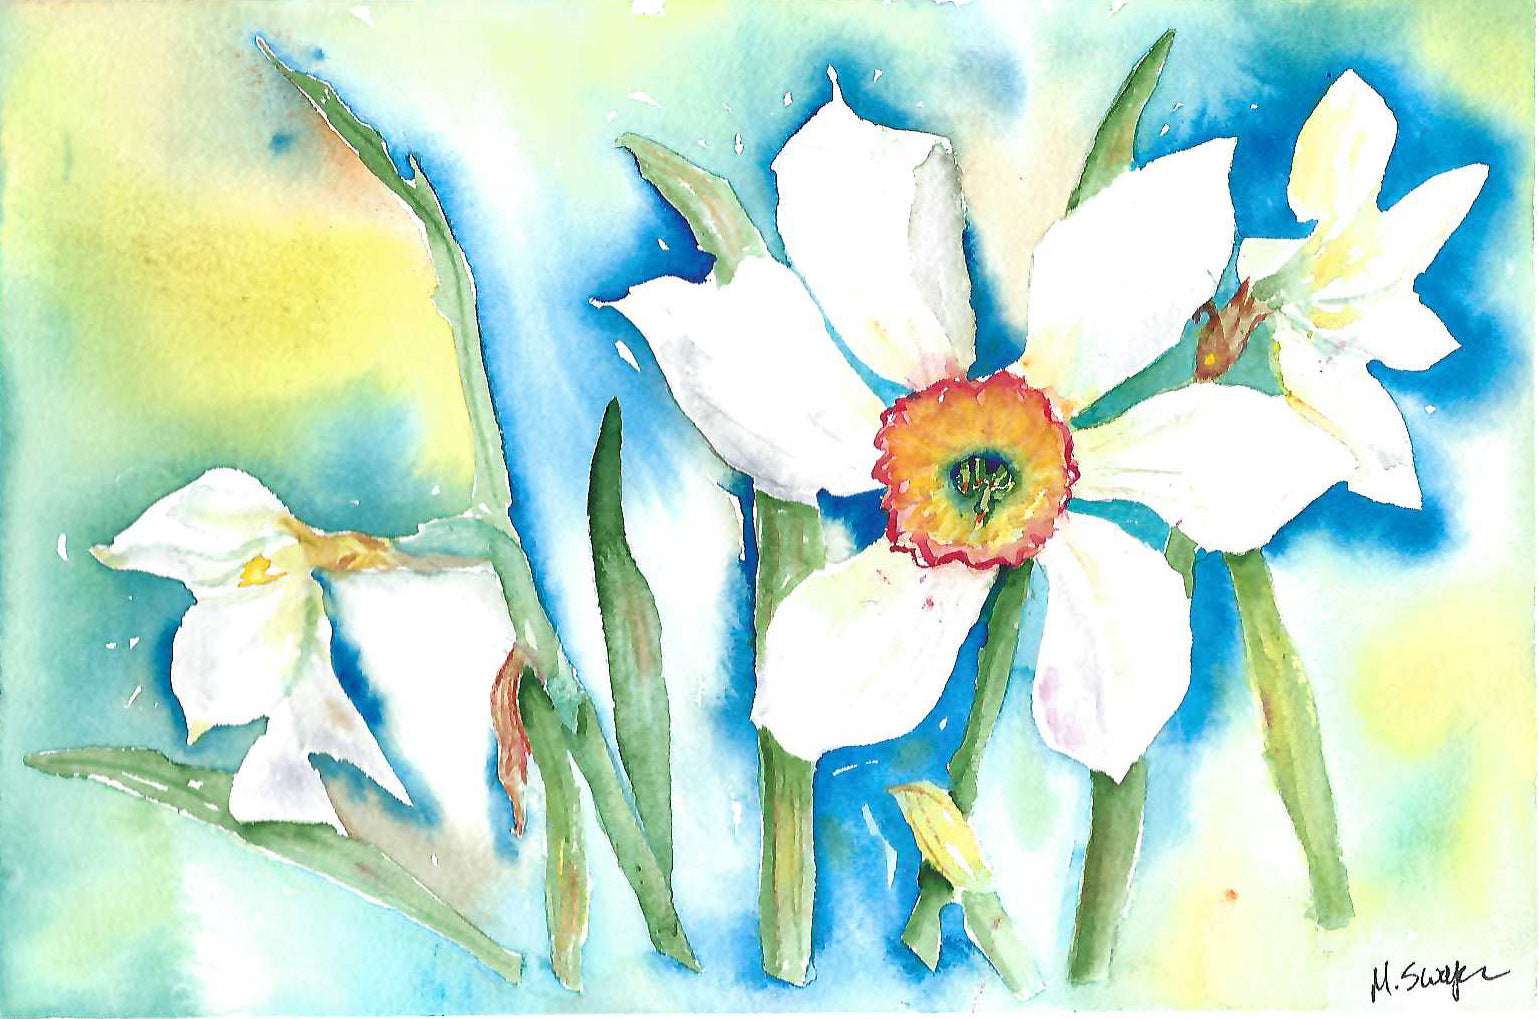 White Daffodil Surprise by Megan Swoyer.  11 1/2 x 7 1/2. Watercolor on cold press fine art paper.